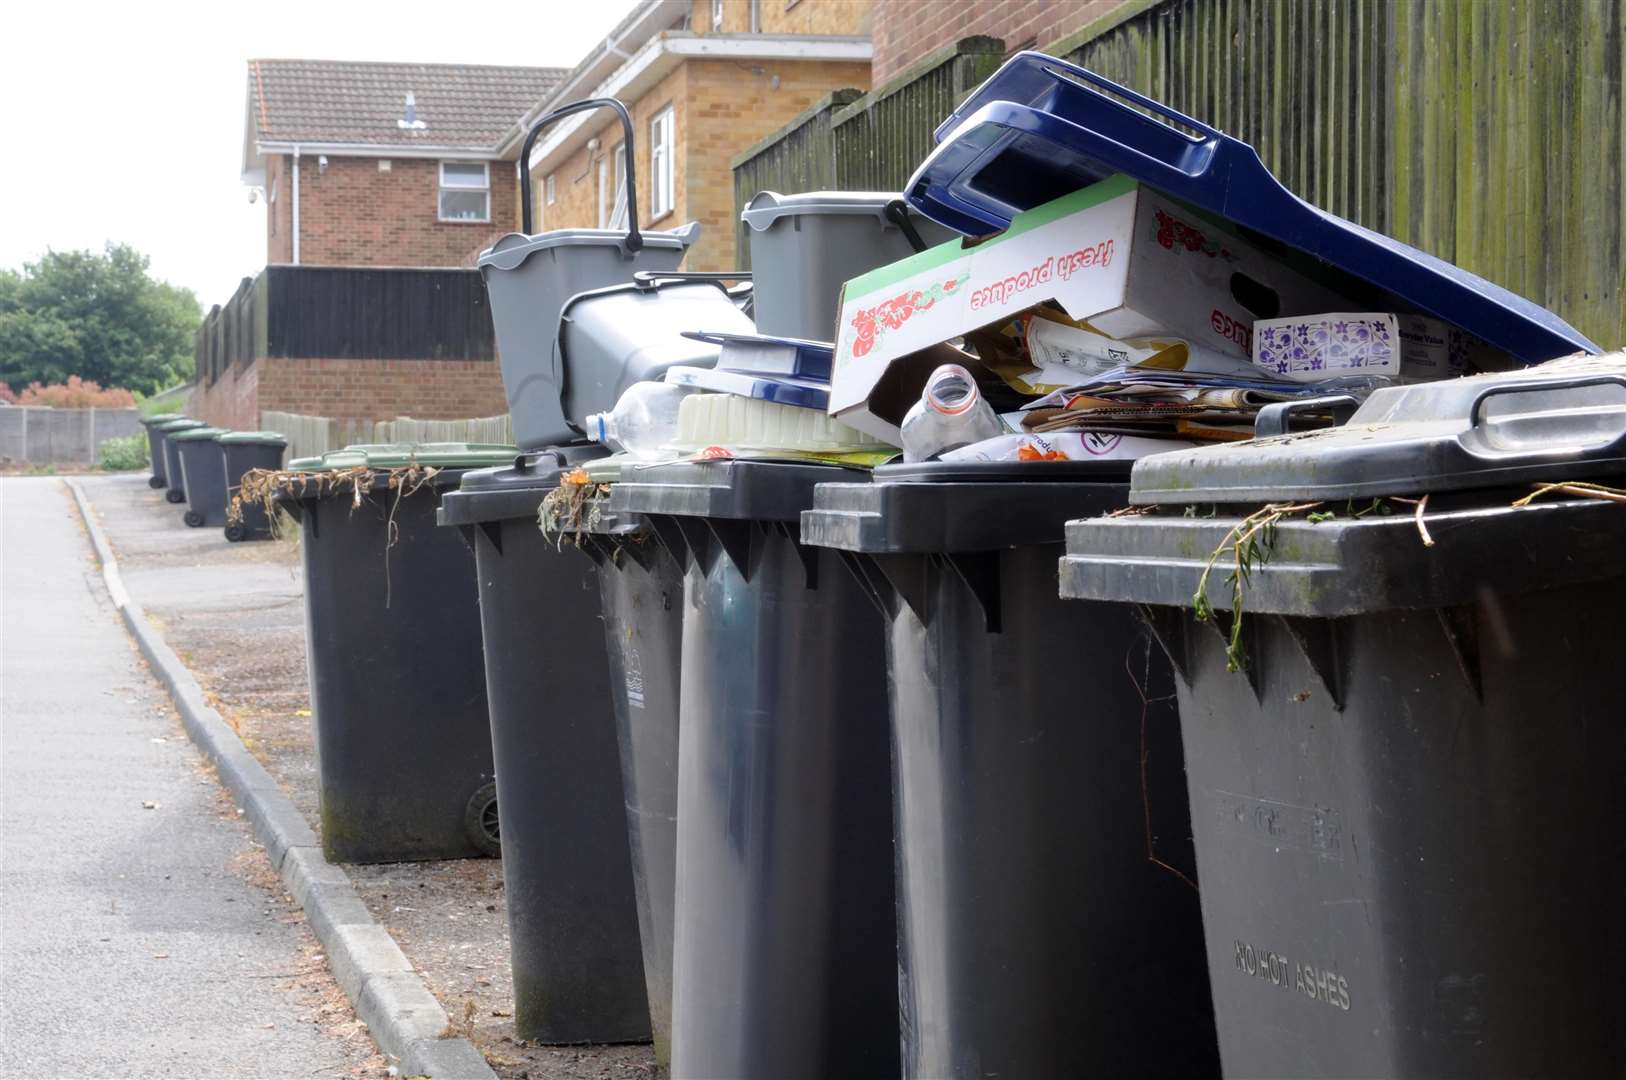 Many blue bins are being filled with rubbish which cannot be recycled